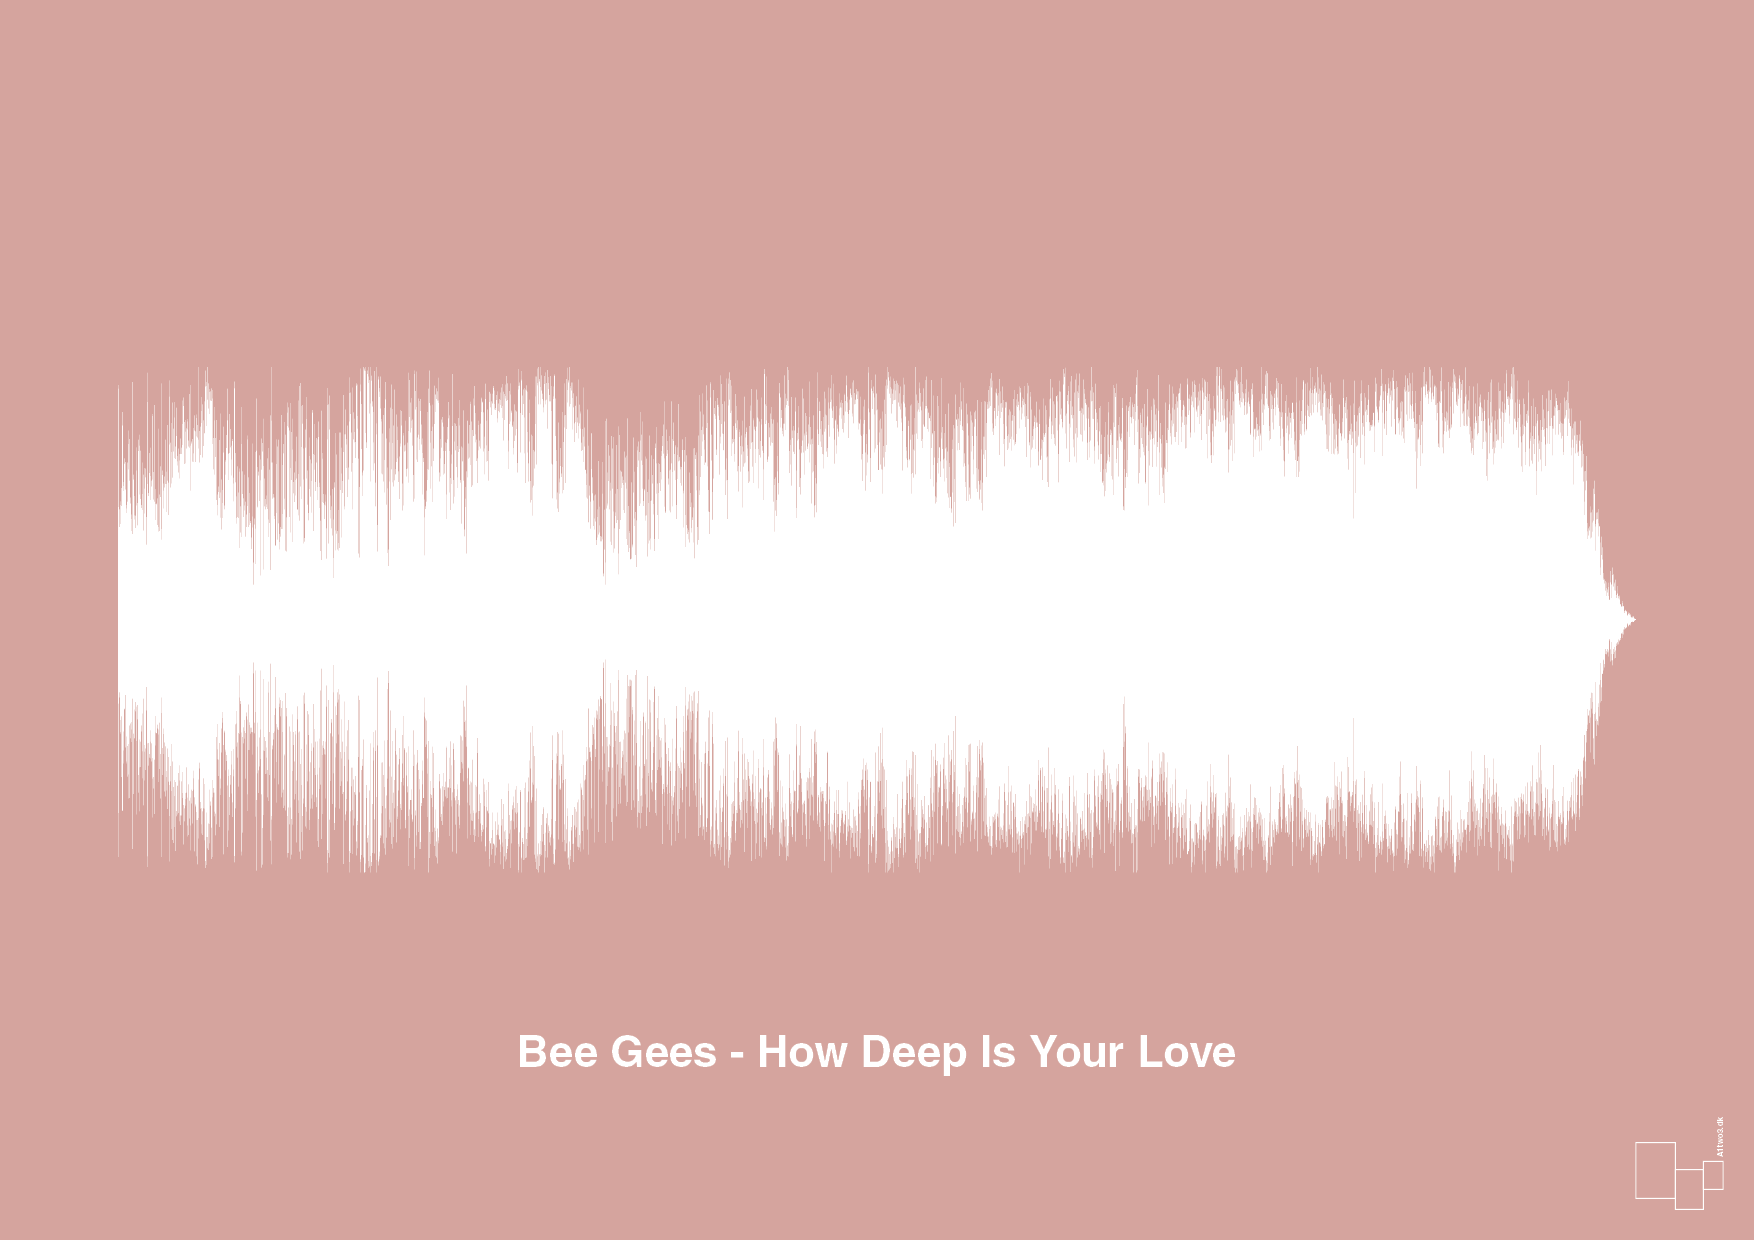 bee gees - how deep is your love - Plakat med Musik i Bubble Shell